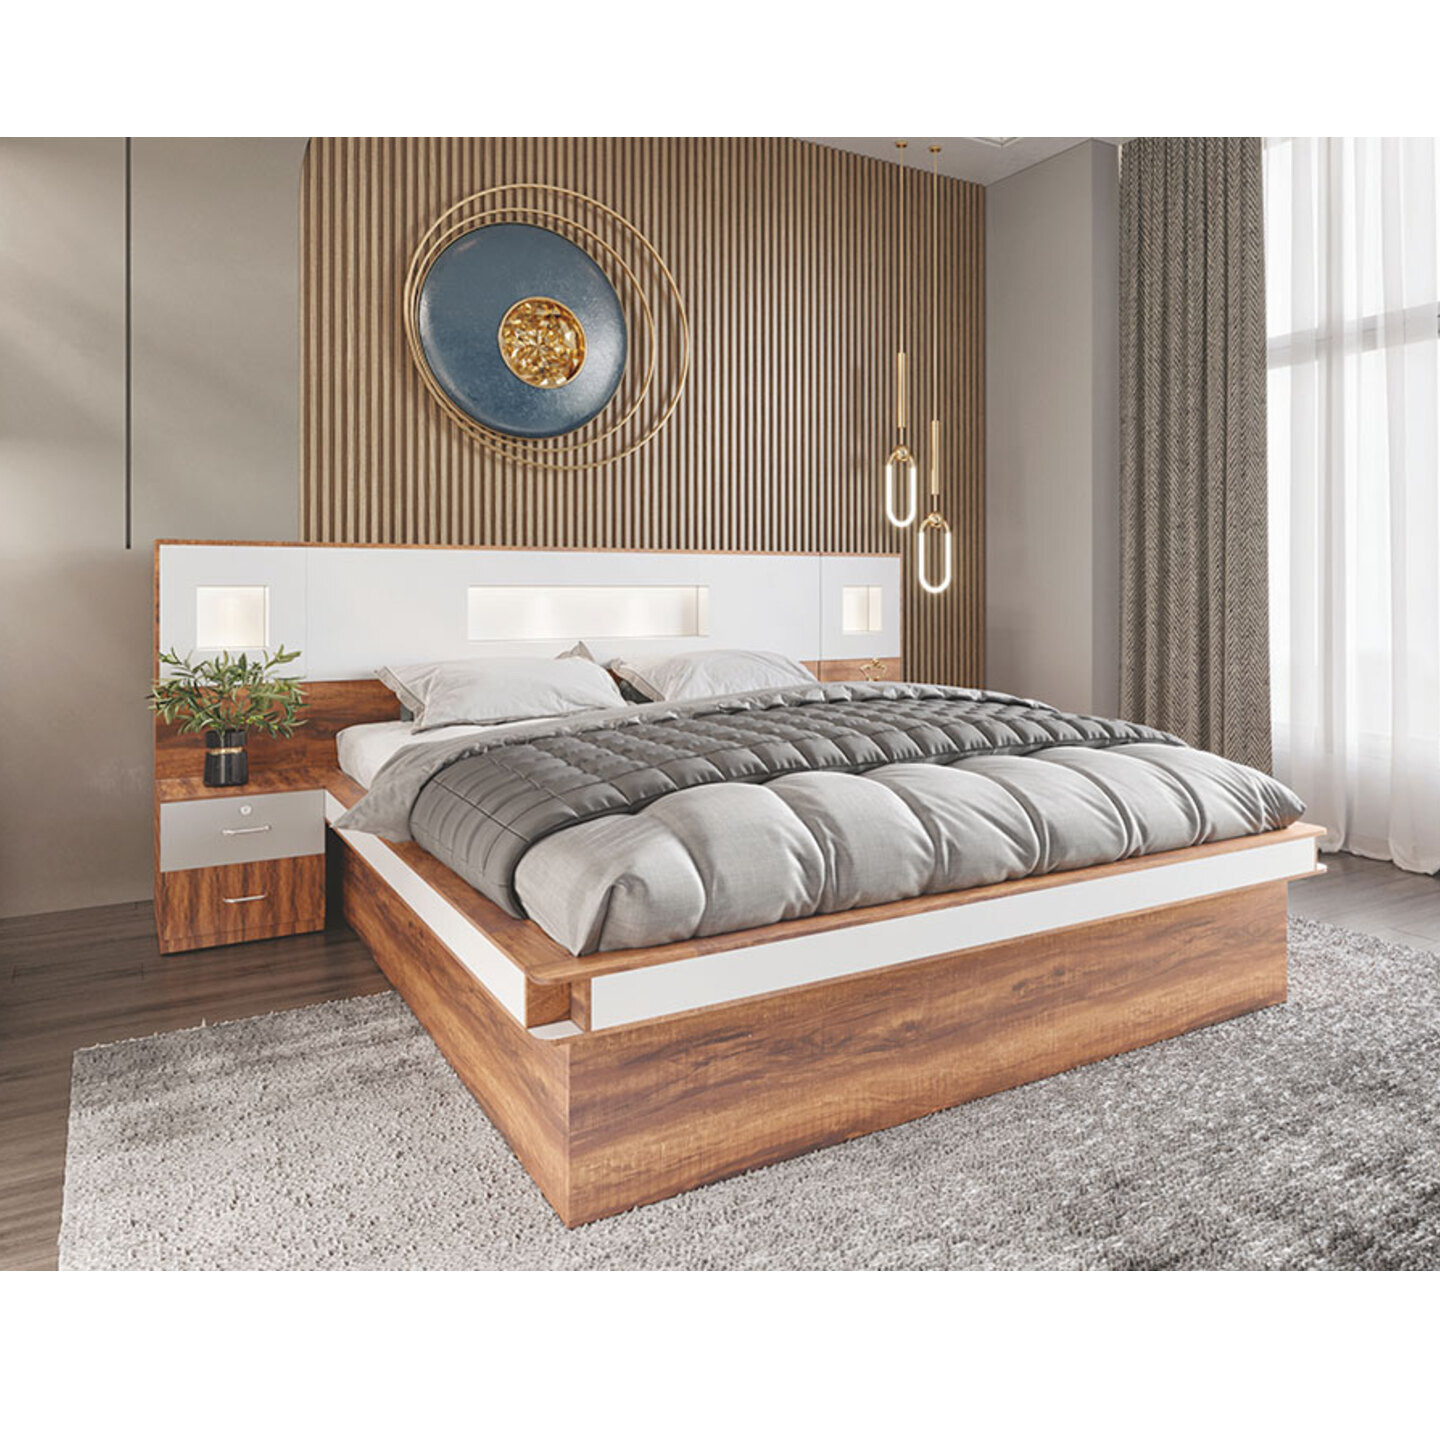 RLF Queen Size Bed 78"x60" Luxury In Brown Colour